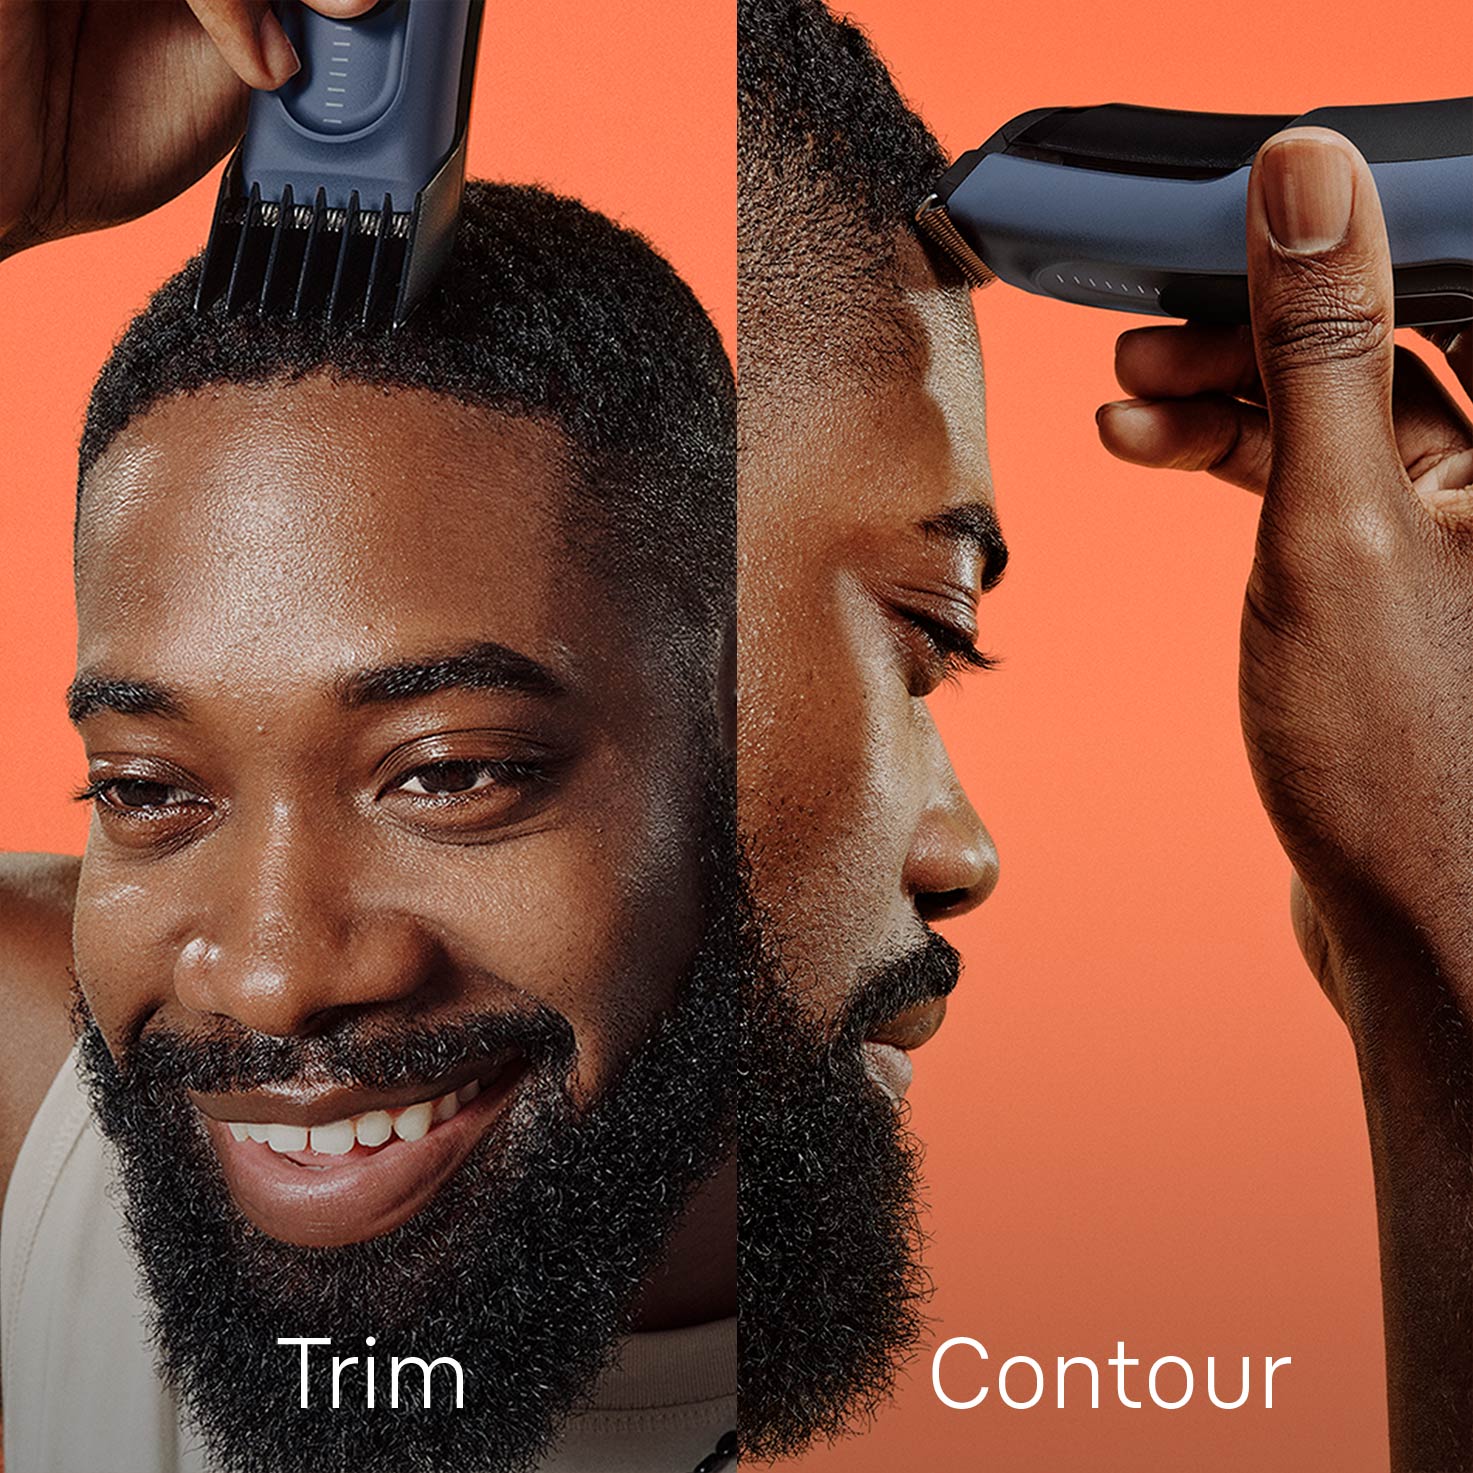 Braun Hair Clipper Series 5, Featuring Lifetime-Sharp Blades, 9 Length  Settings, 50-min runtime, Gifts for Men, HC5310, Black : :  Health & Personal Care